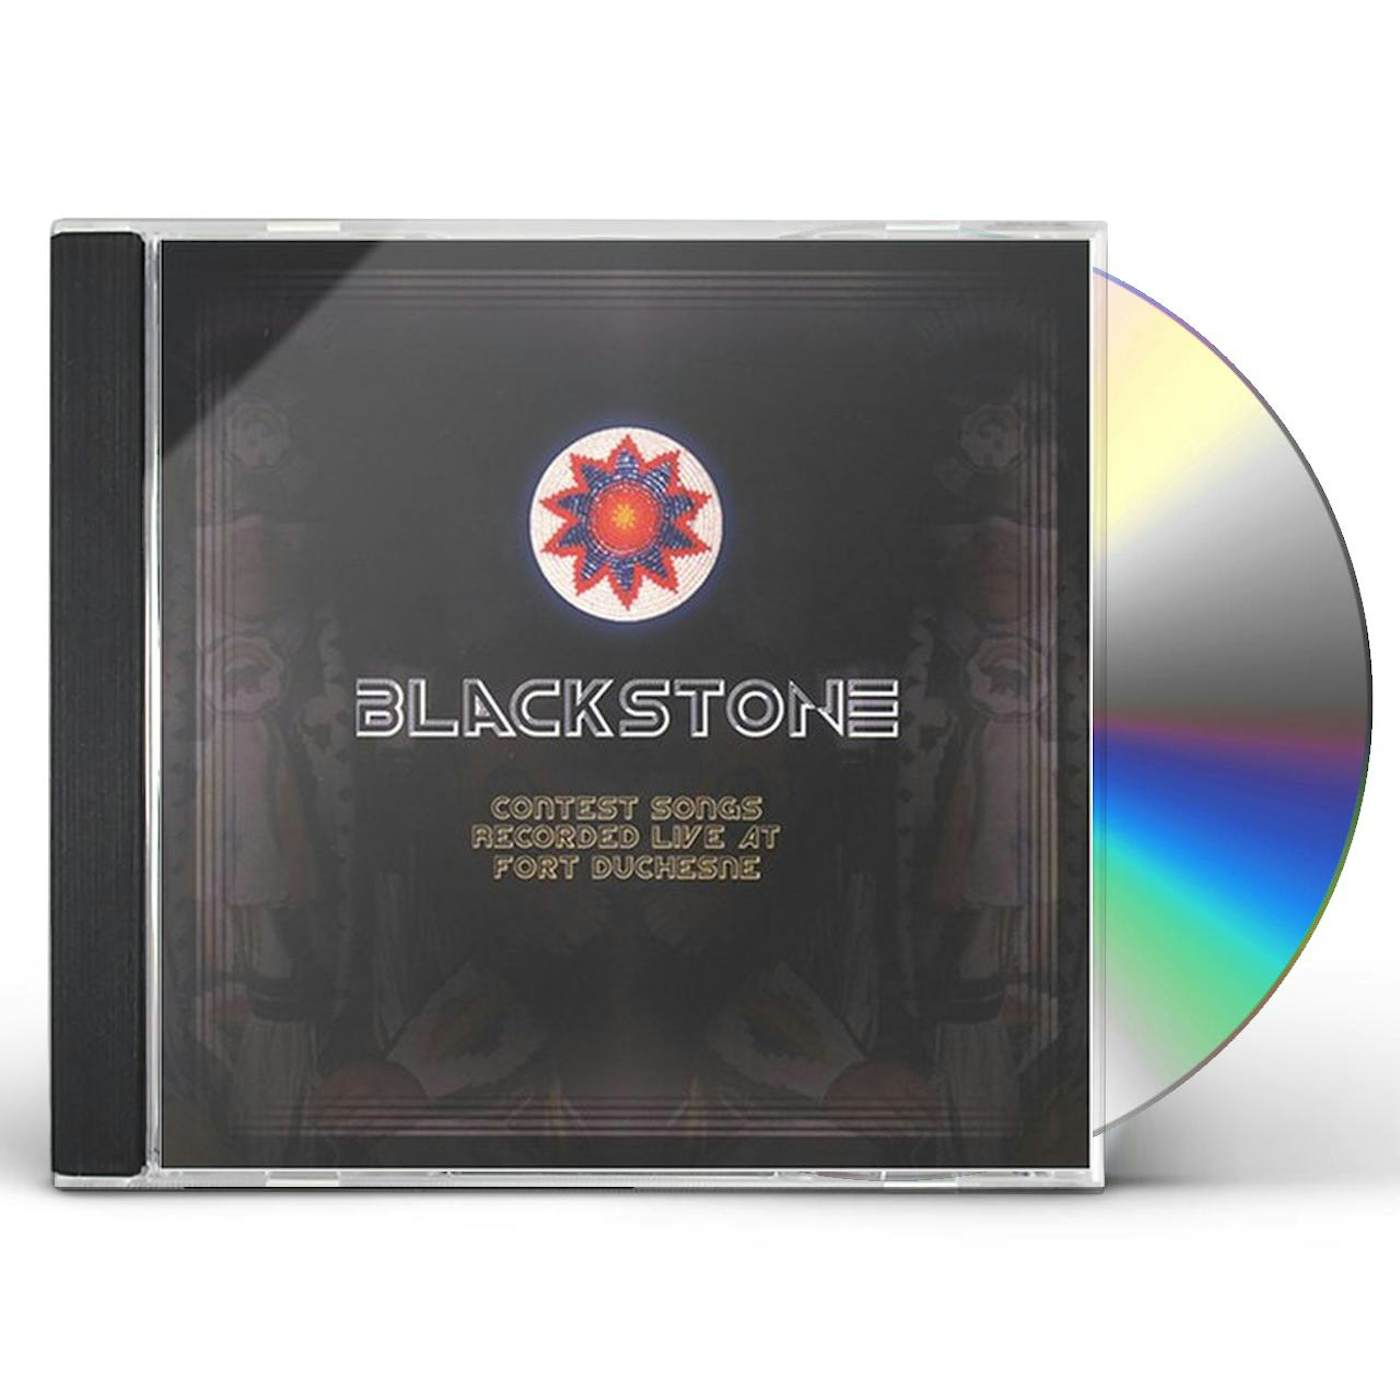 Blackstone CONTEST SONGS RECORDED LIVE AT FORT DUCHESNE CD